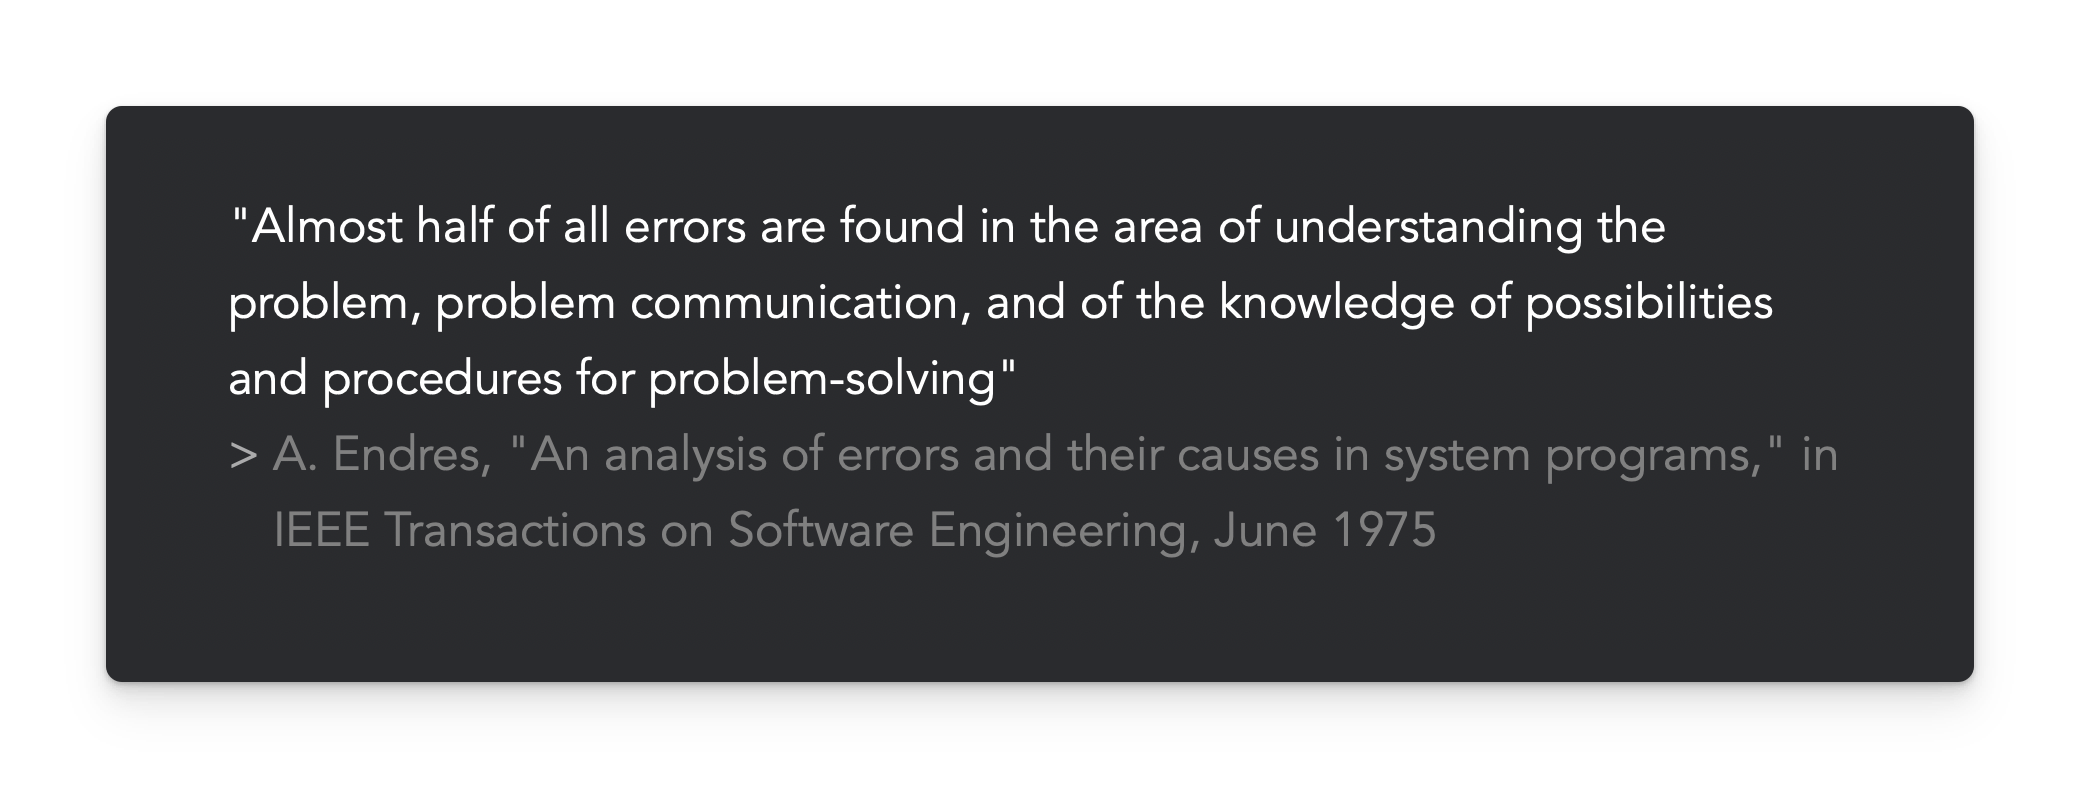 "Almost half of all errors are found in the area of understanding the problem, problem communication and of the knowledge of possibilities and procedures for problem-solving"